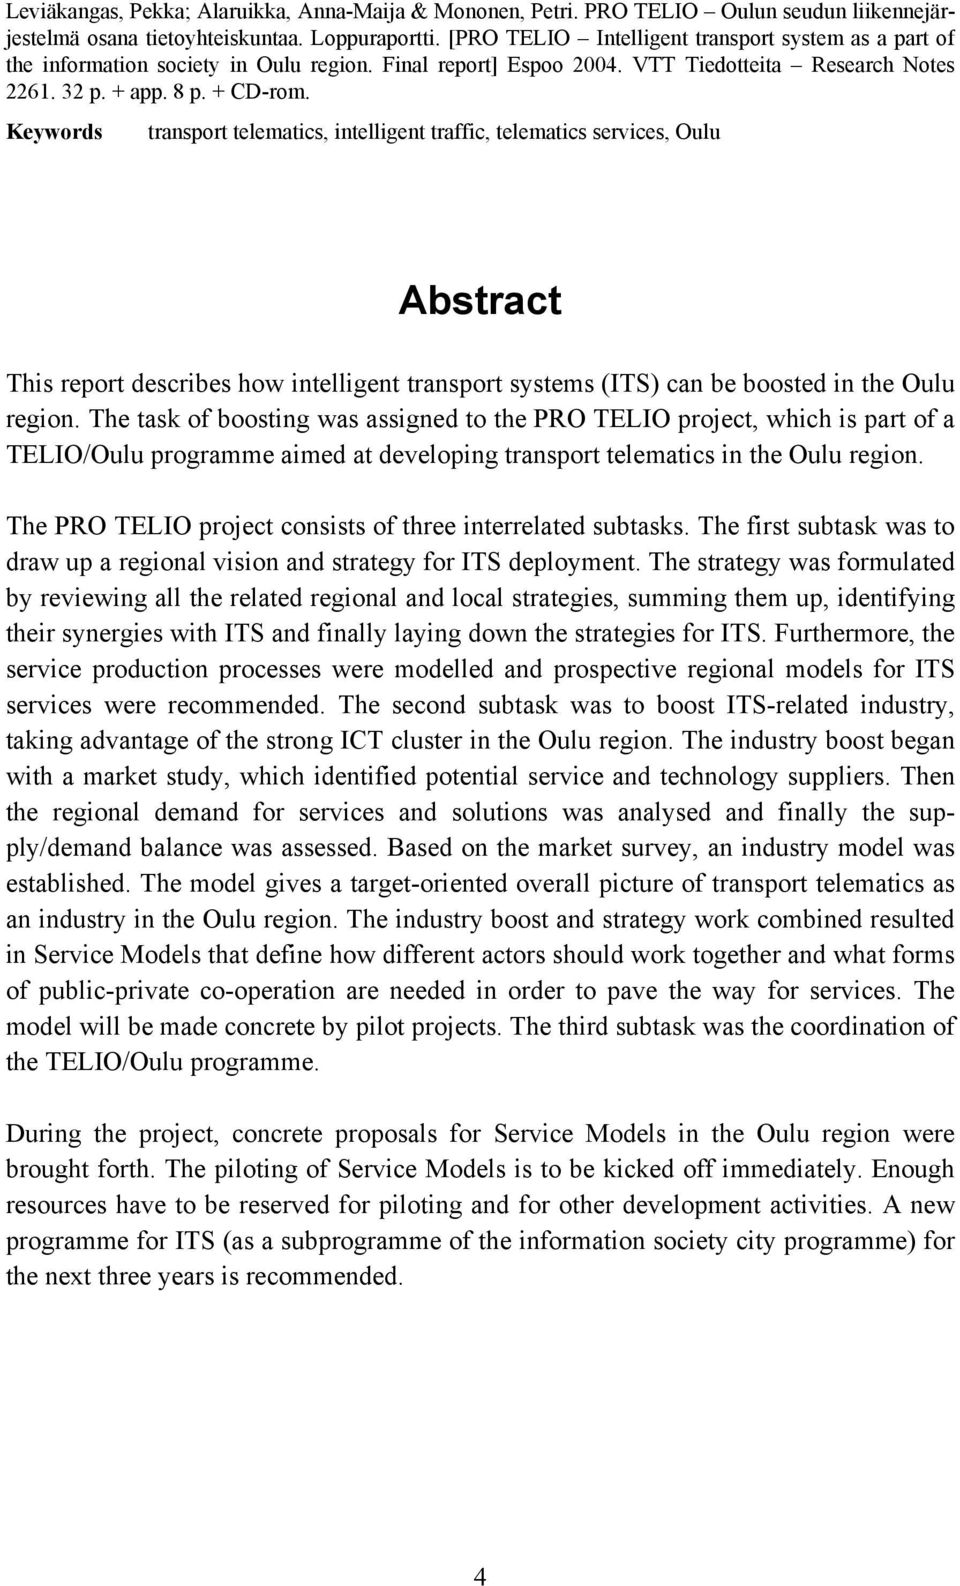 Keywords transport telematics, intelligent traffic, telematics services, Oulu Abstract This report describes how intelligent transport systems (ITS) can be boosted in the Oulu region.